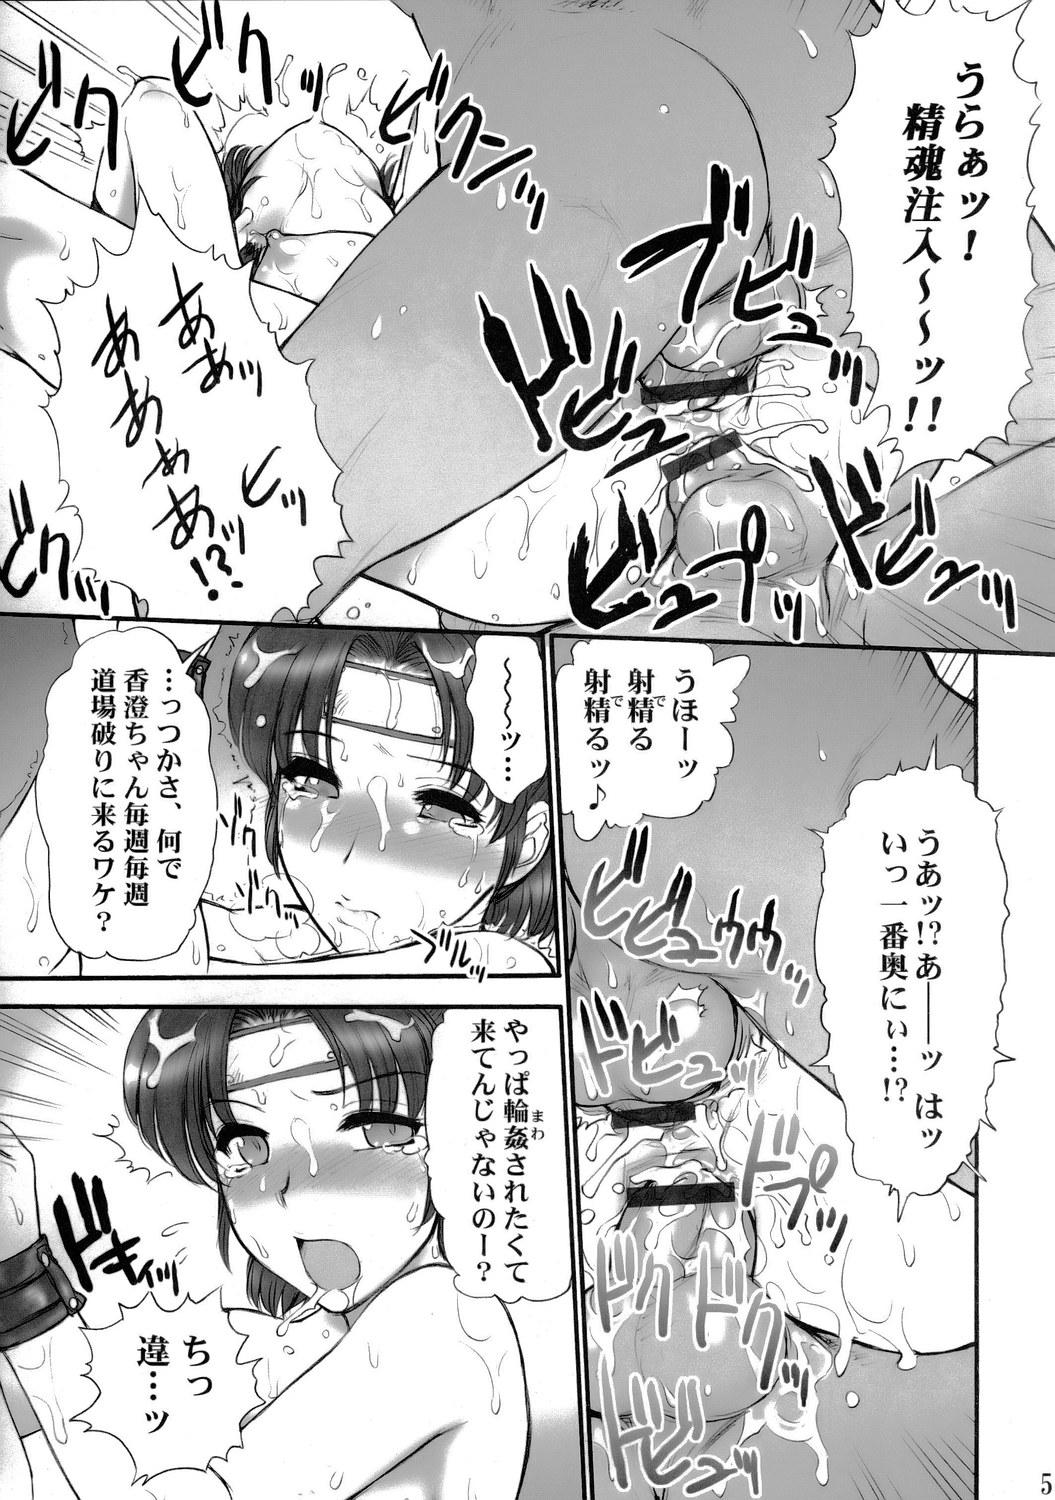 Forbidden (SC29) [Shinnihon Pepsitou (St. Germain-sal)] Report Concerning Kyoku-gen-ryuu (The King of Fighters) - King of fighters Sextape - Page 6